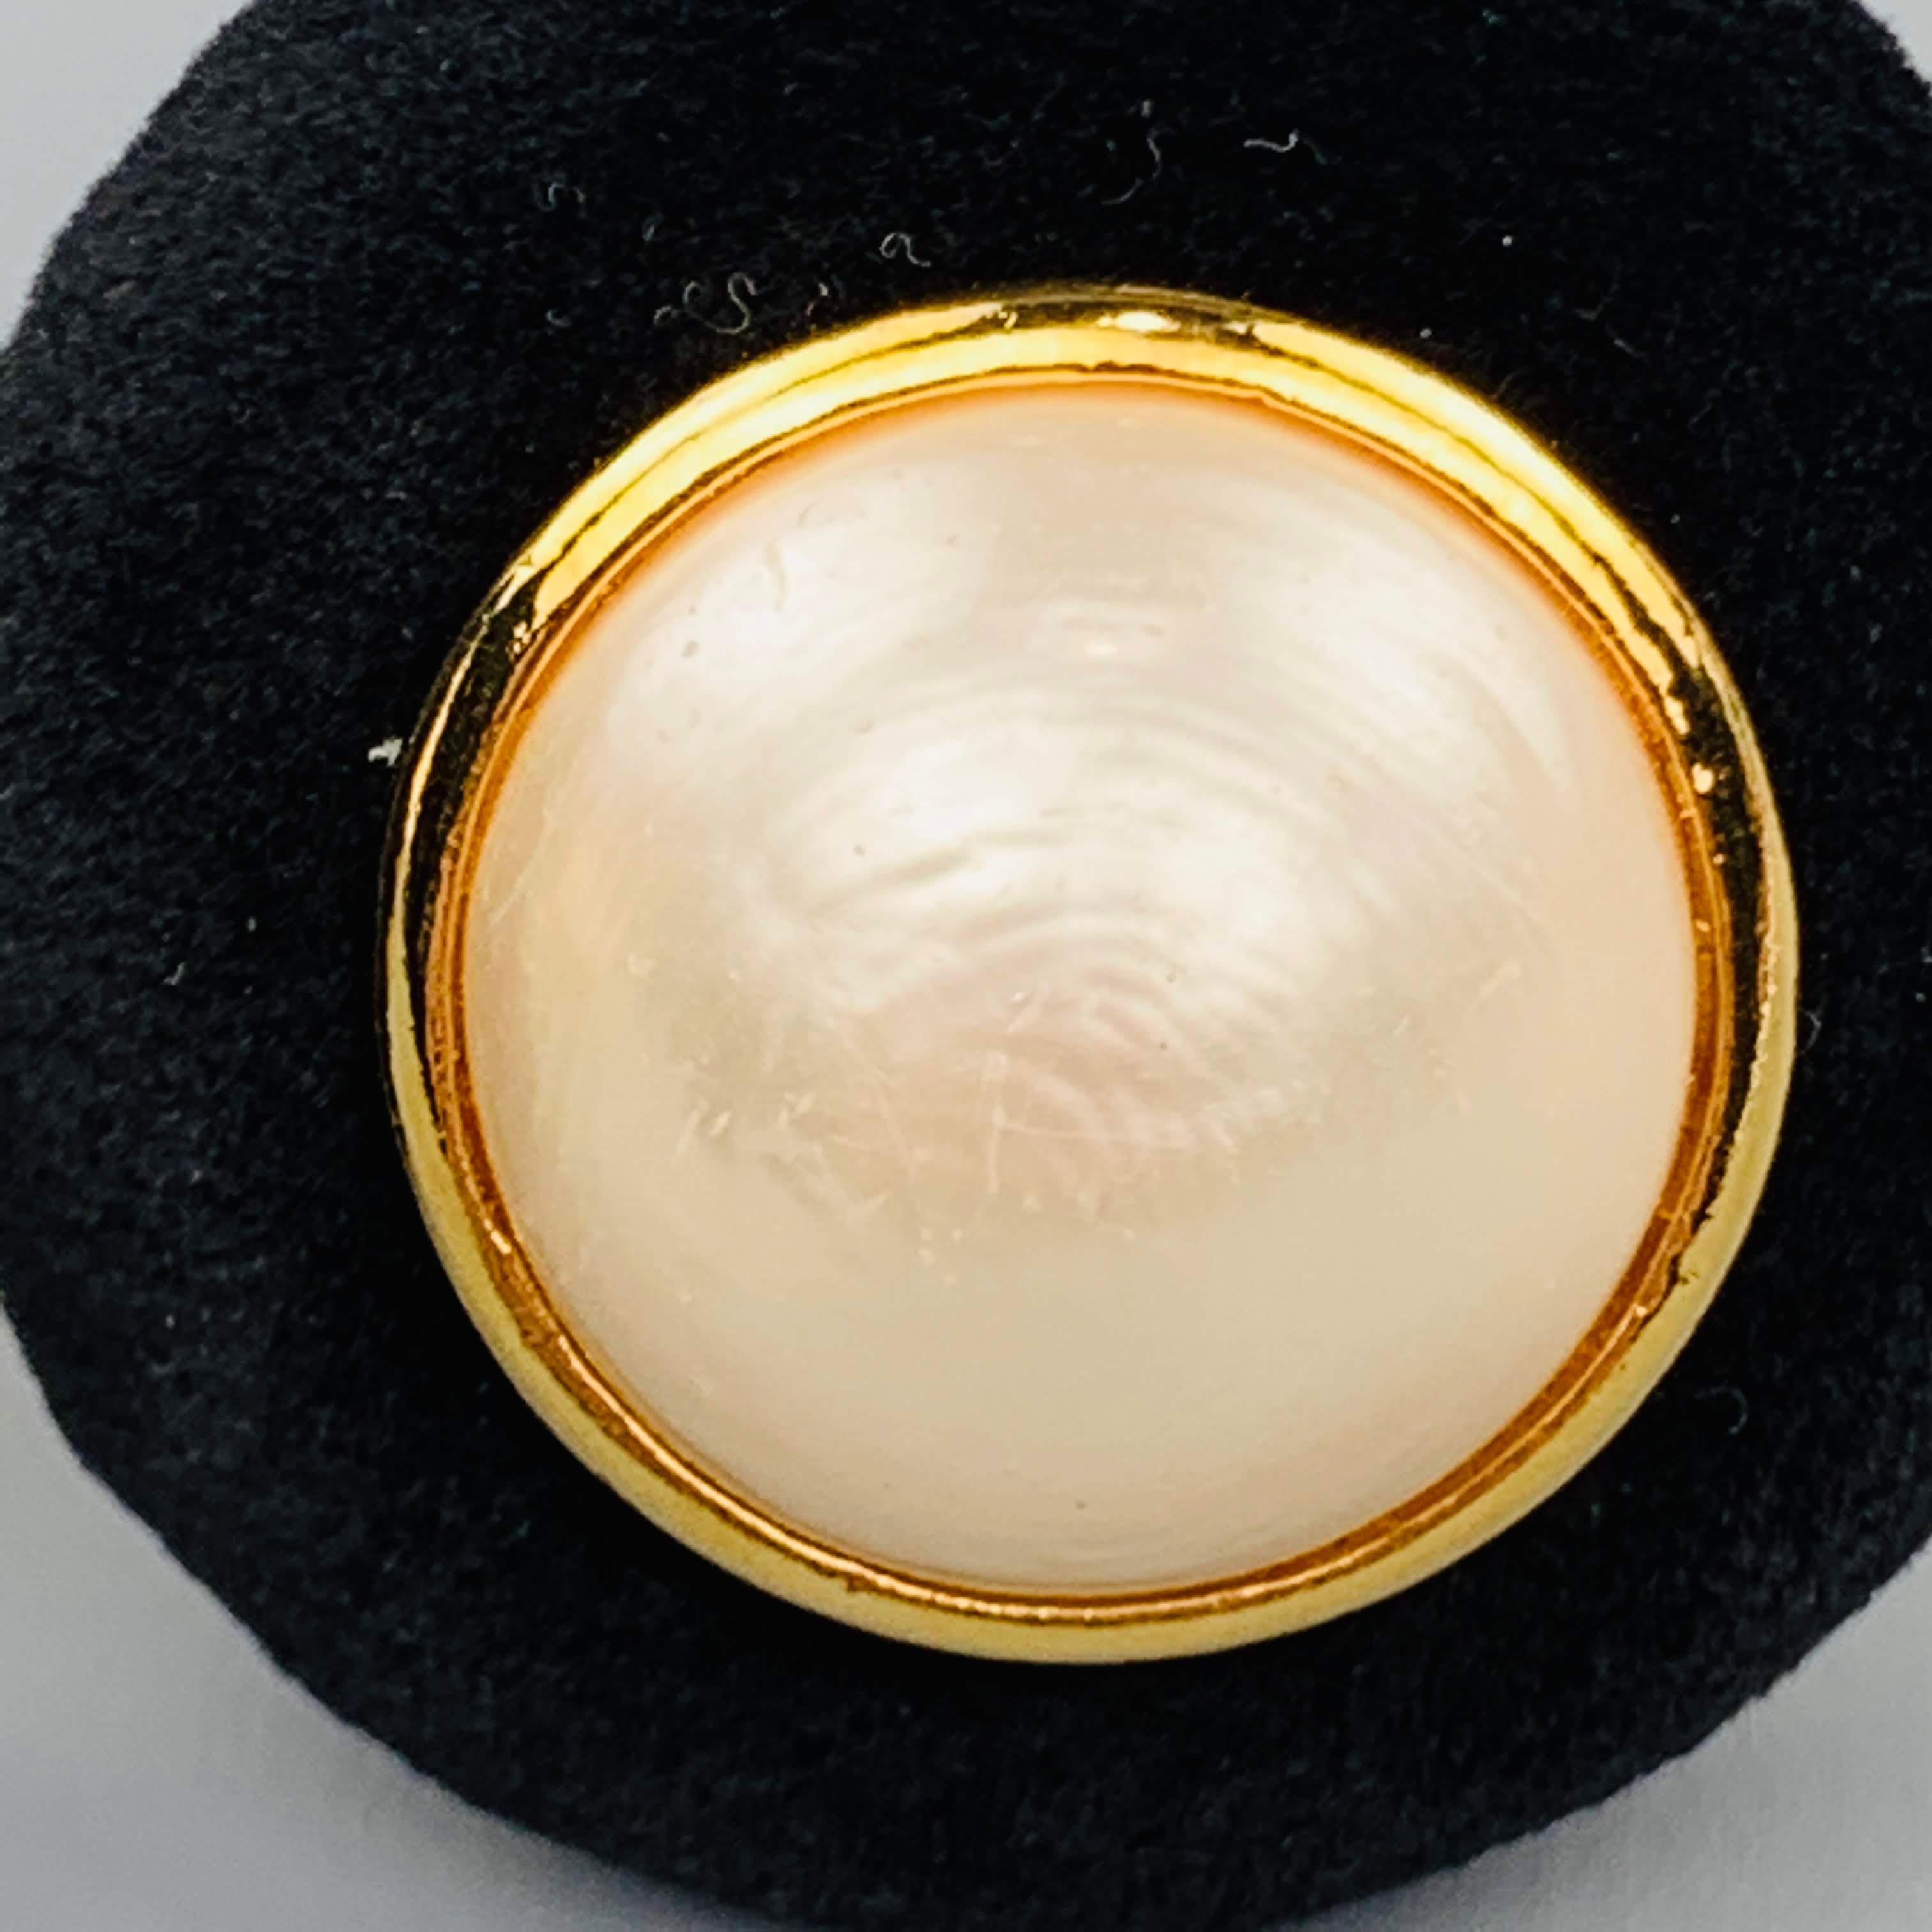 Vintage Season 23 circa 1986 circular clip on earrings comes in yellow gold tone metal with black velvet front and faux pearl motif. Made in France.
 
Very Good Pre-Owned Condition.
Marked: 23
 
4 x 4 cm.